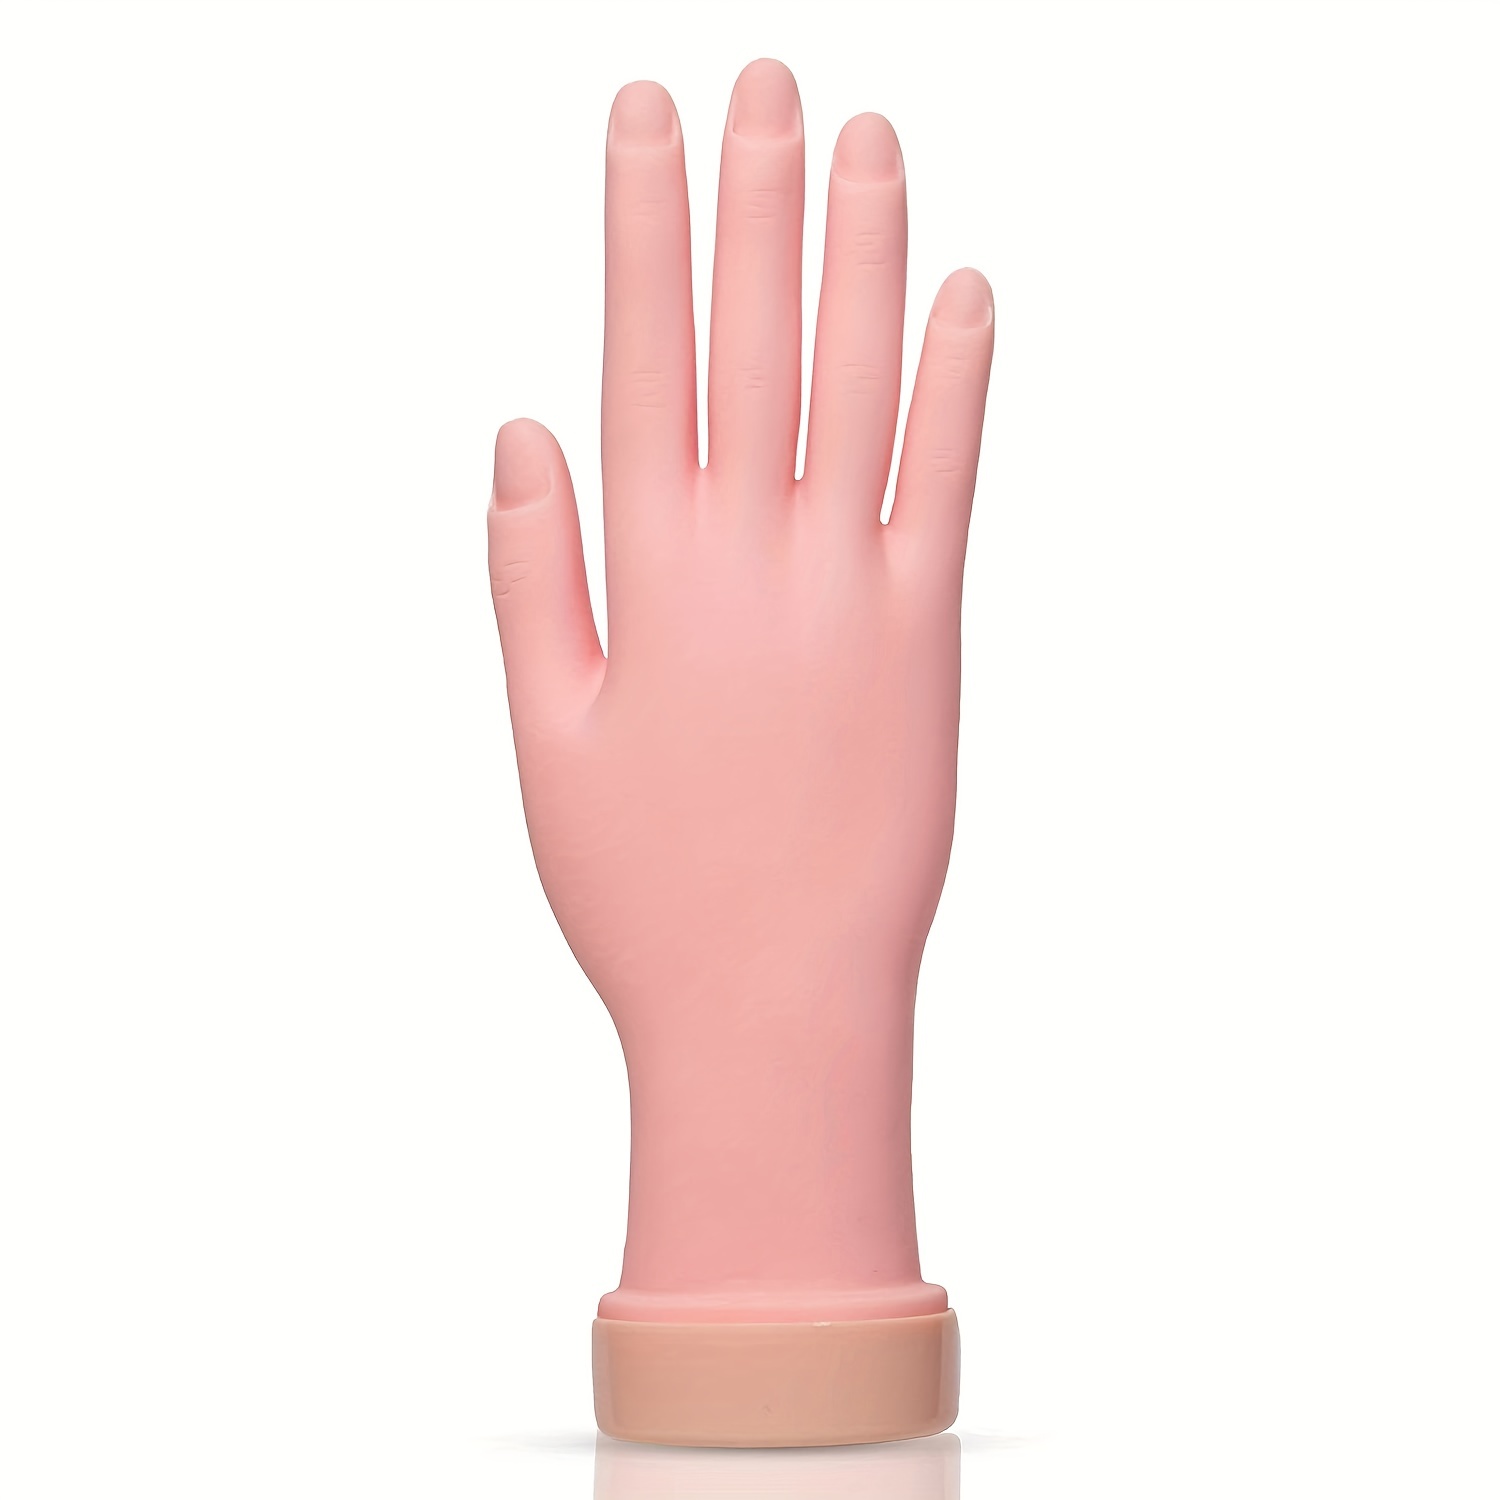 

Nail Training Hand Flexible Soft Practice Plastic Mannequin Hand Nail Trainer Manicure Practice Hand Tool